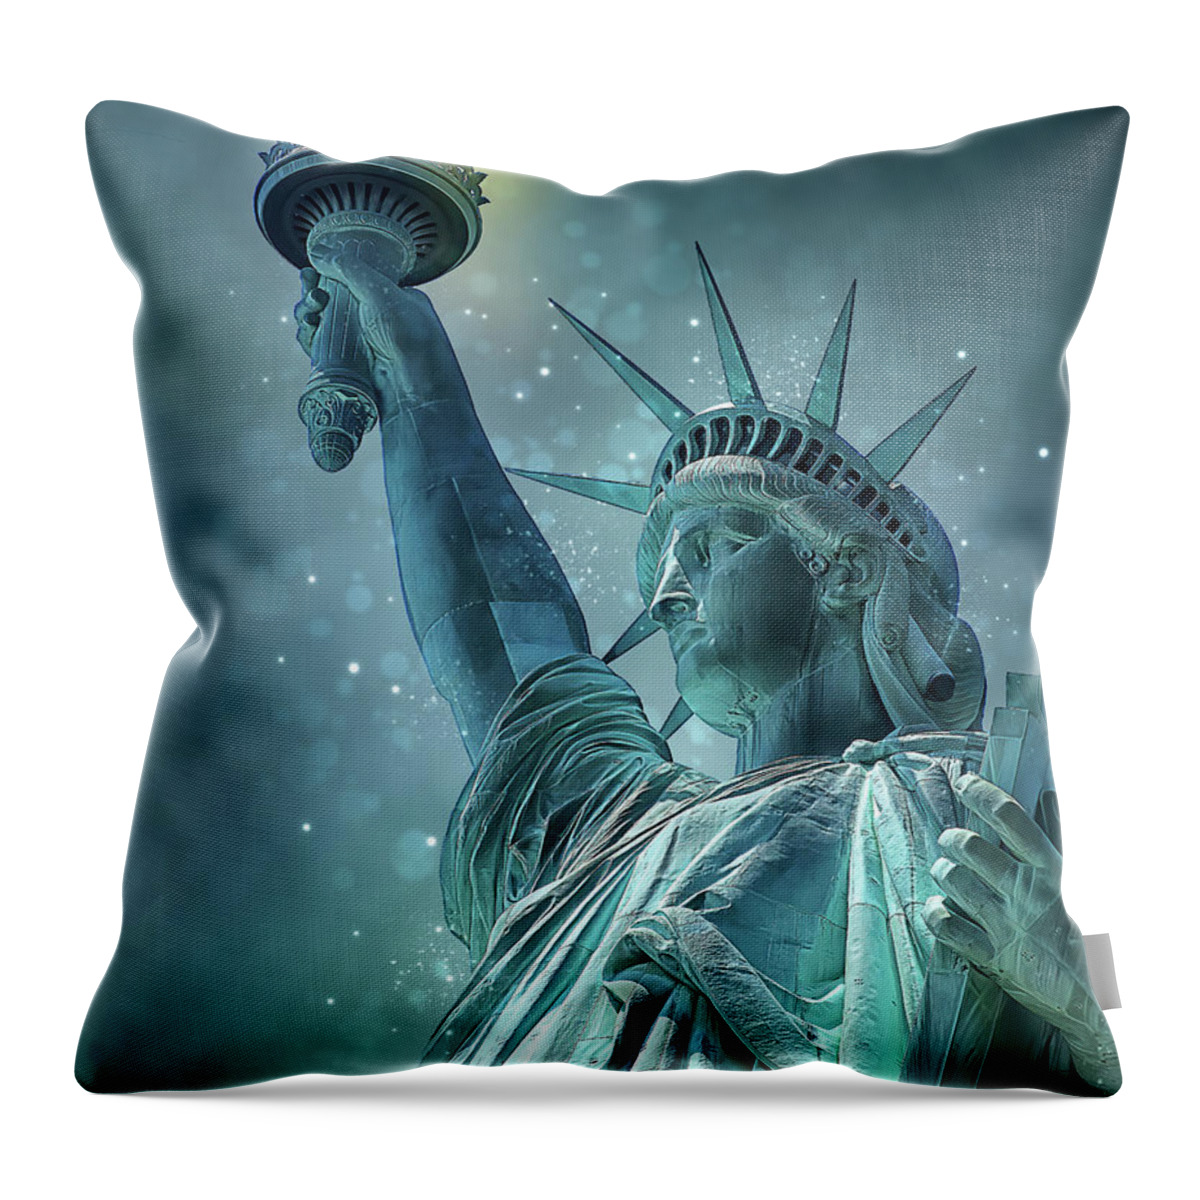 Statue Of Liberty Throw Pillow featuring the digital art Statue of Liberty by Dave Lee